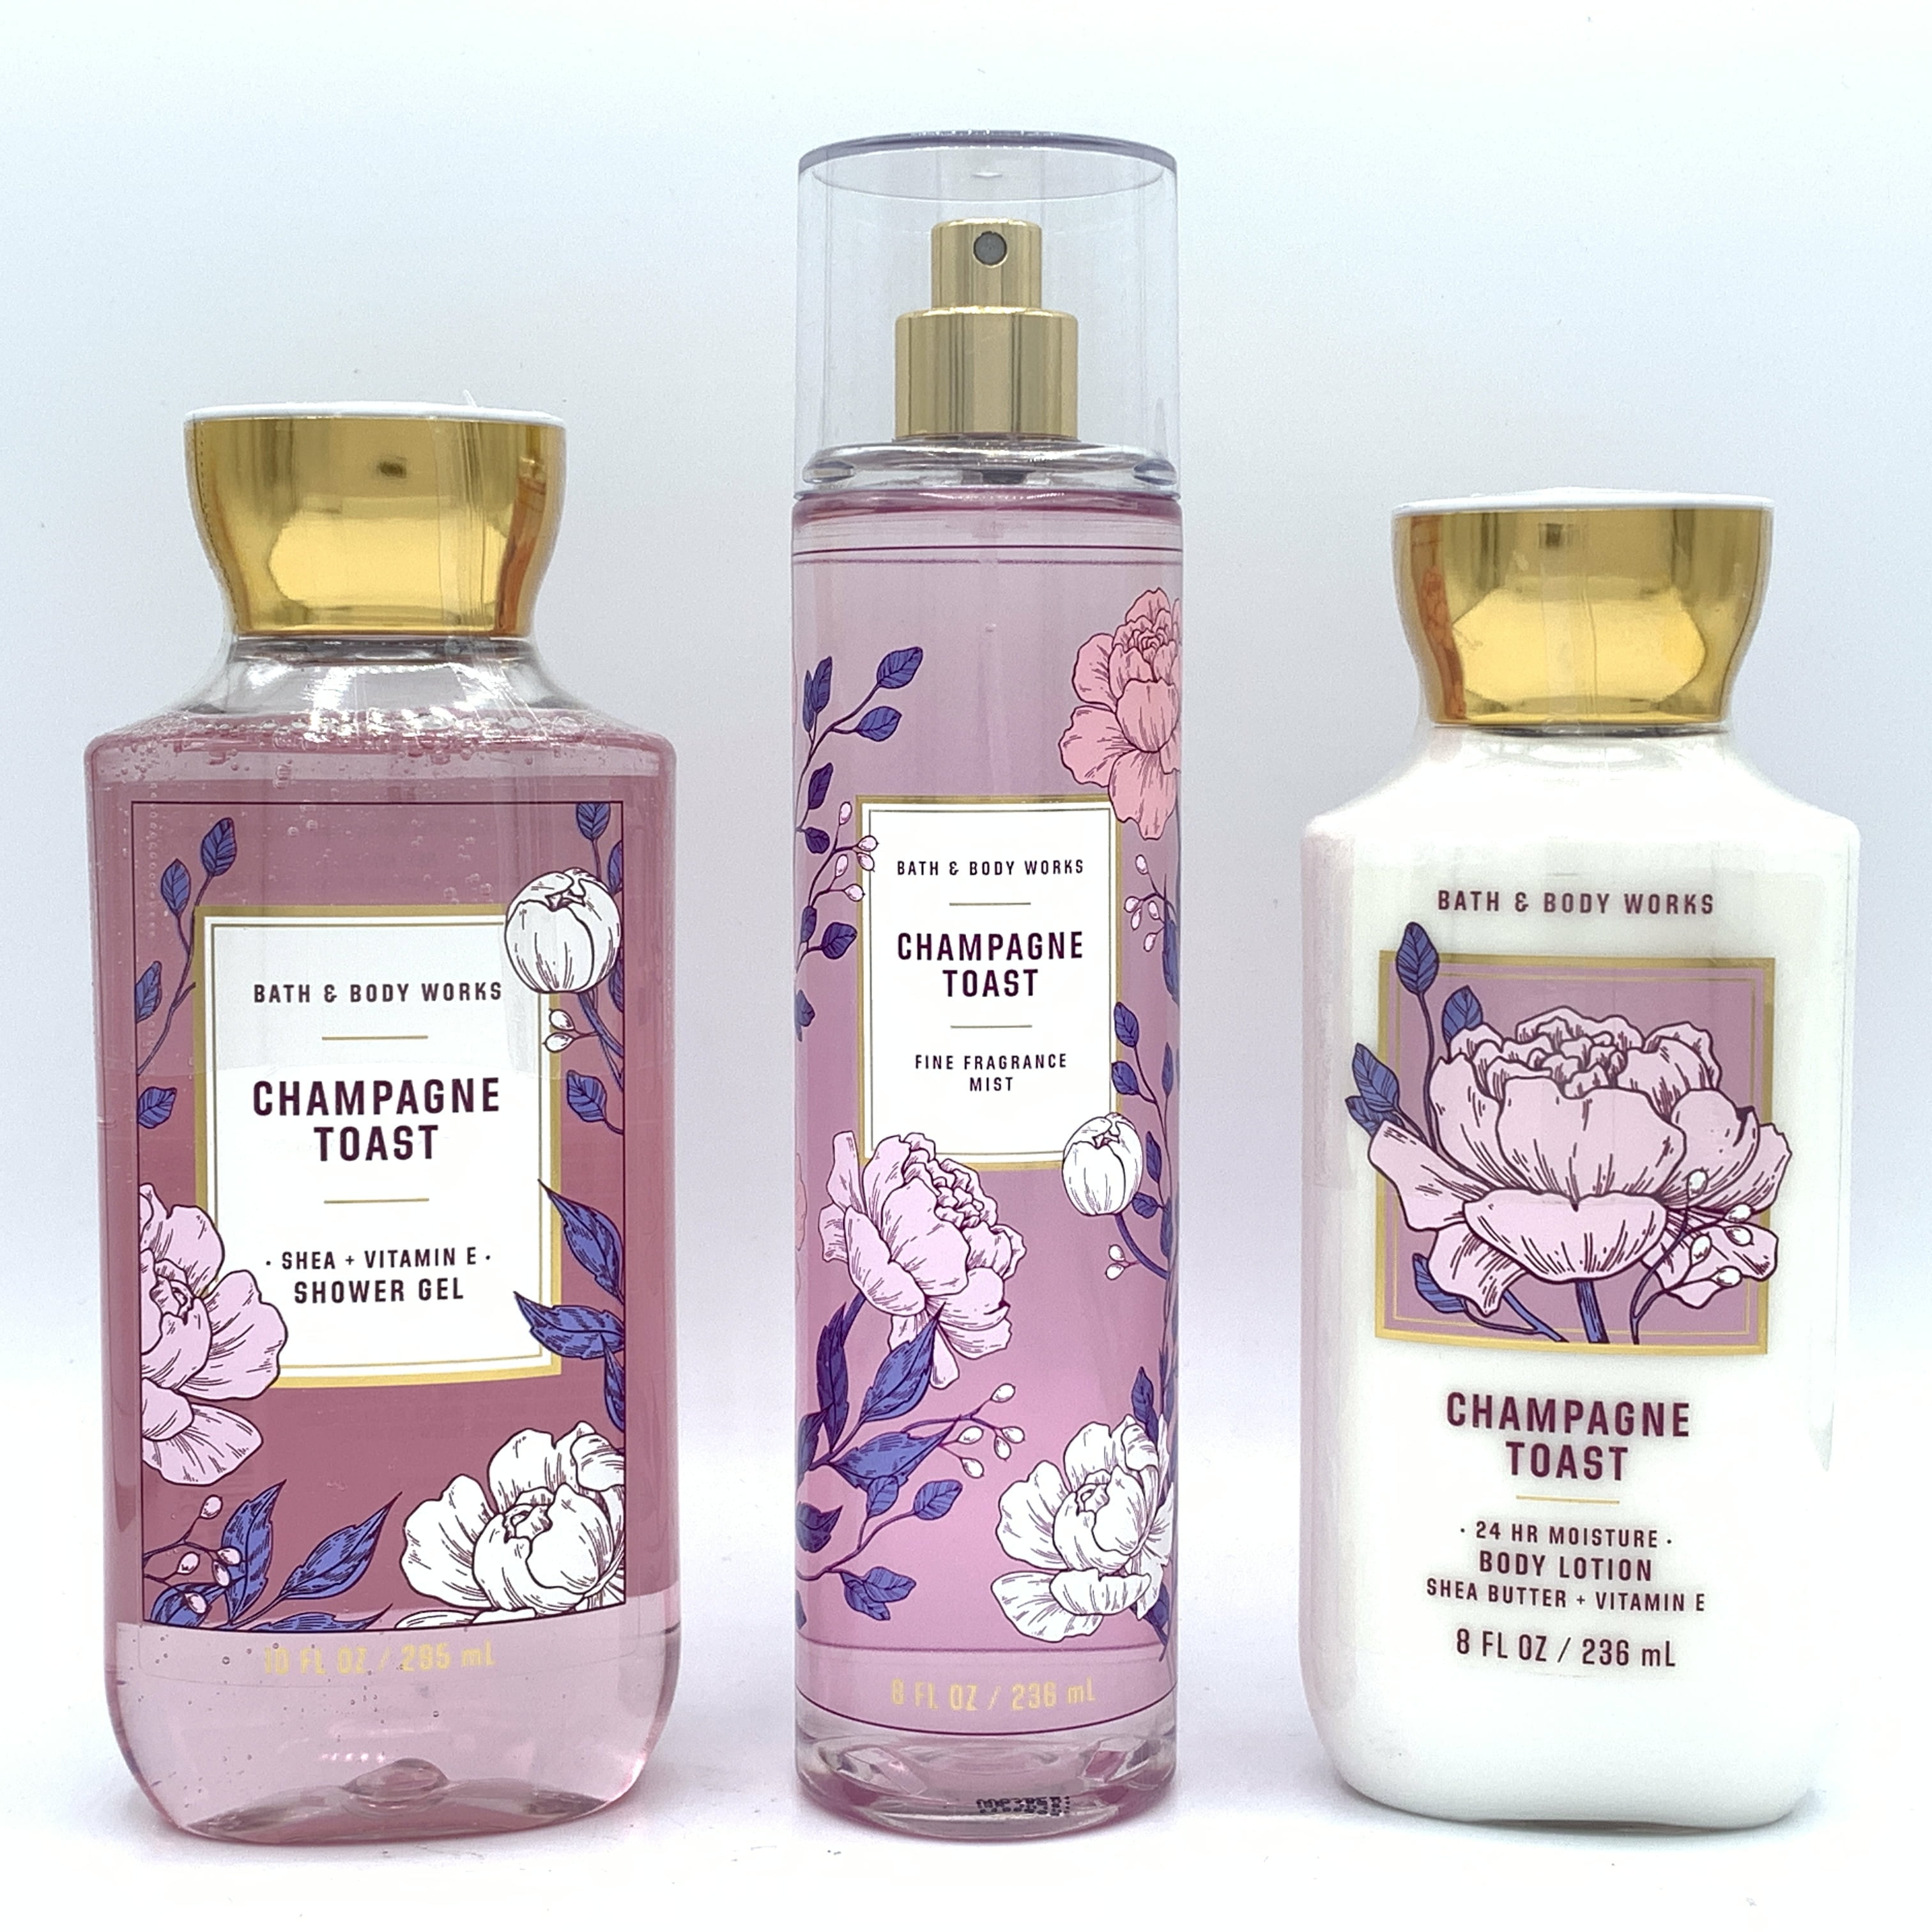 Bath and Body Works Champagne Toast Shower Gel, Fine Fragrance Mist and